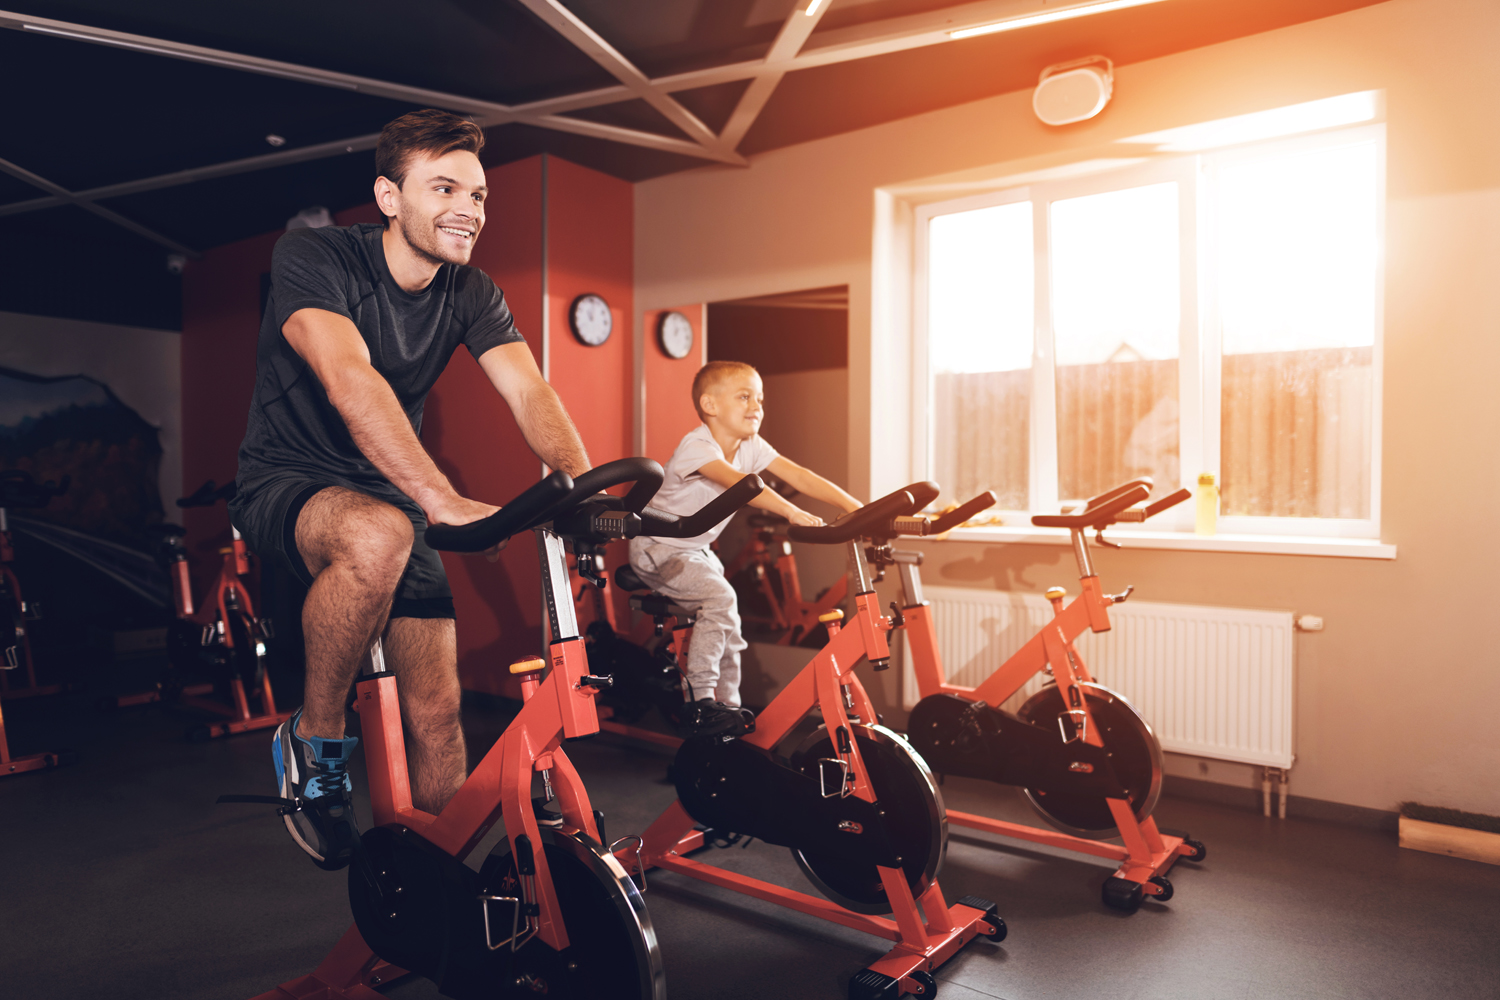 A father and his son using exercise bikes in a gym on a sunny day.